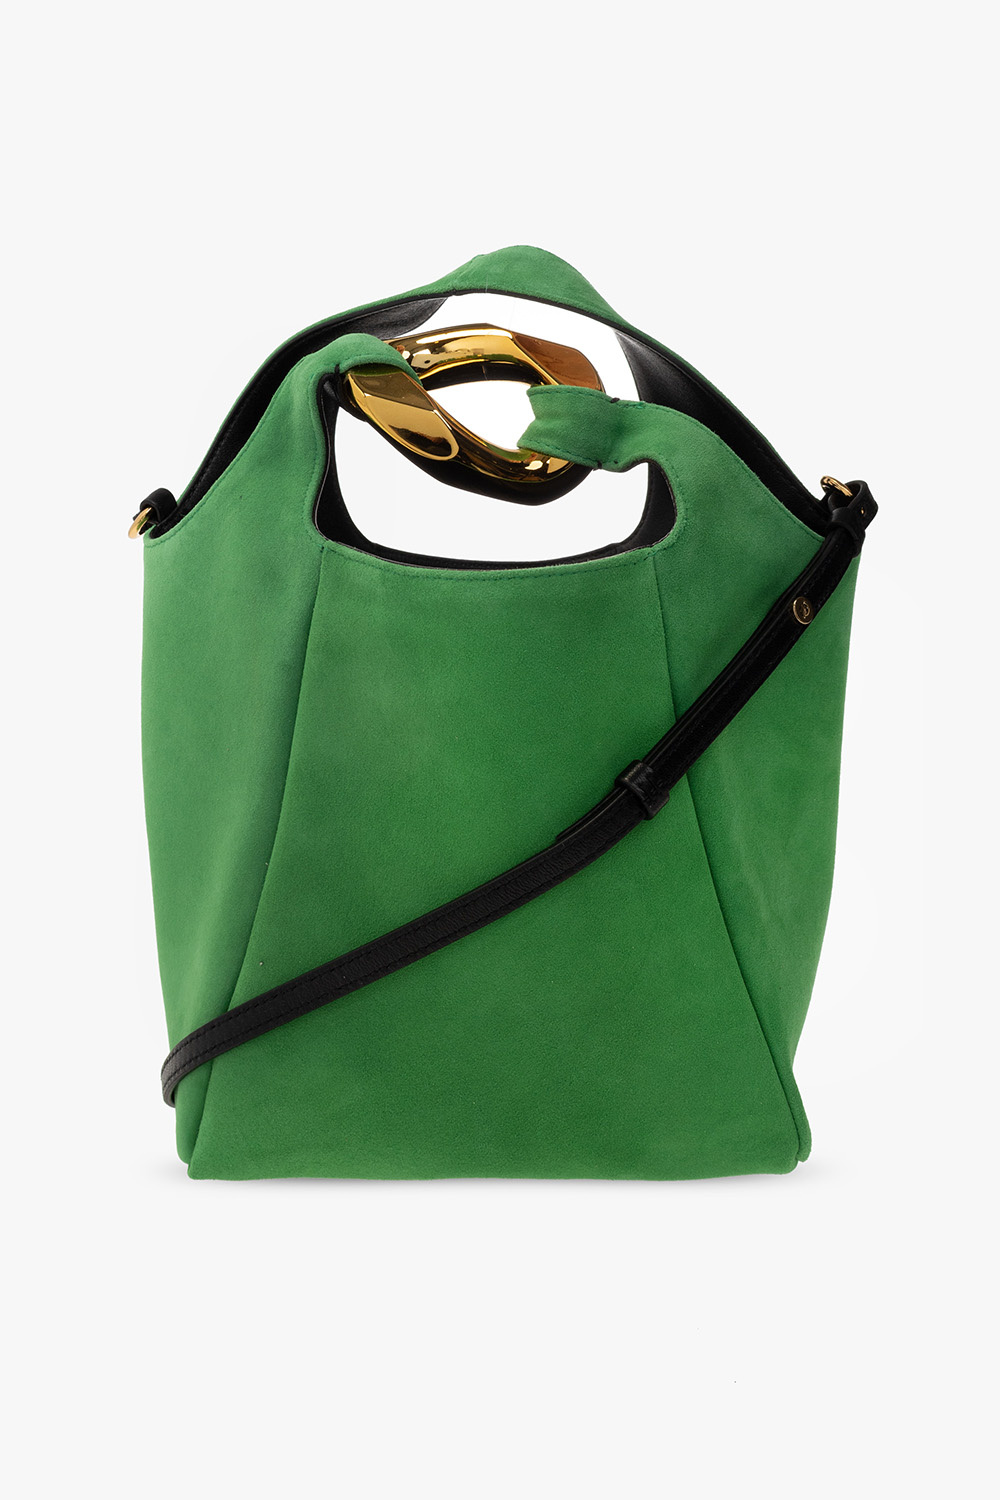 JW Anderson Chain-link Detail Leather Tote Bag (Totes)